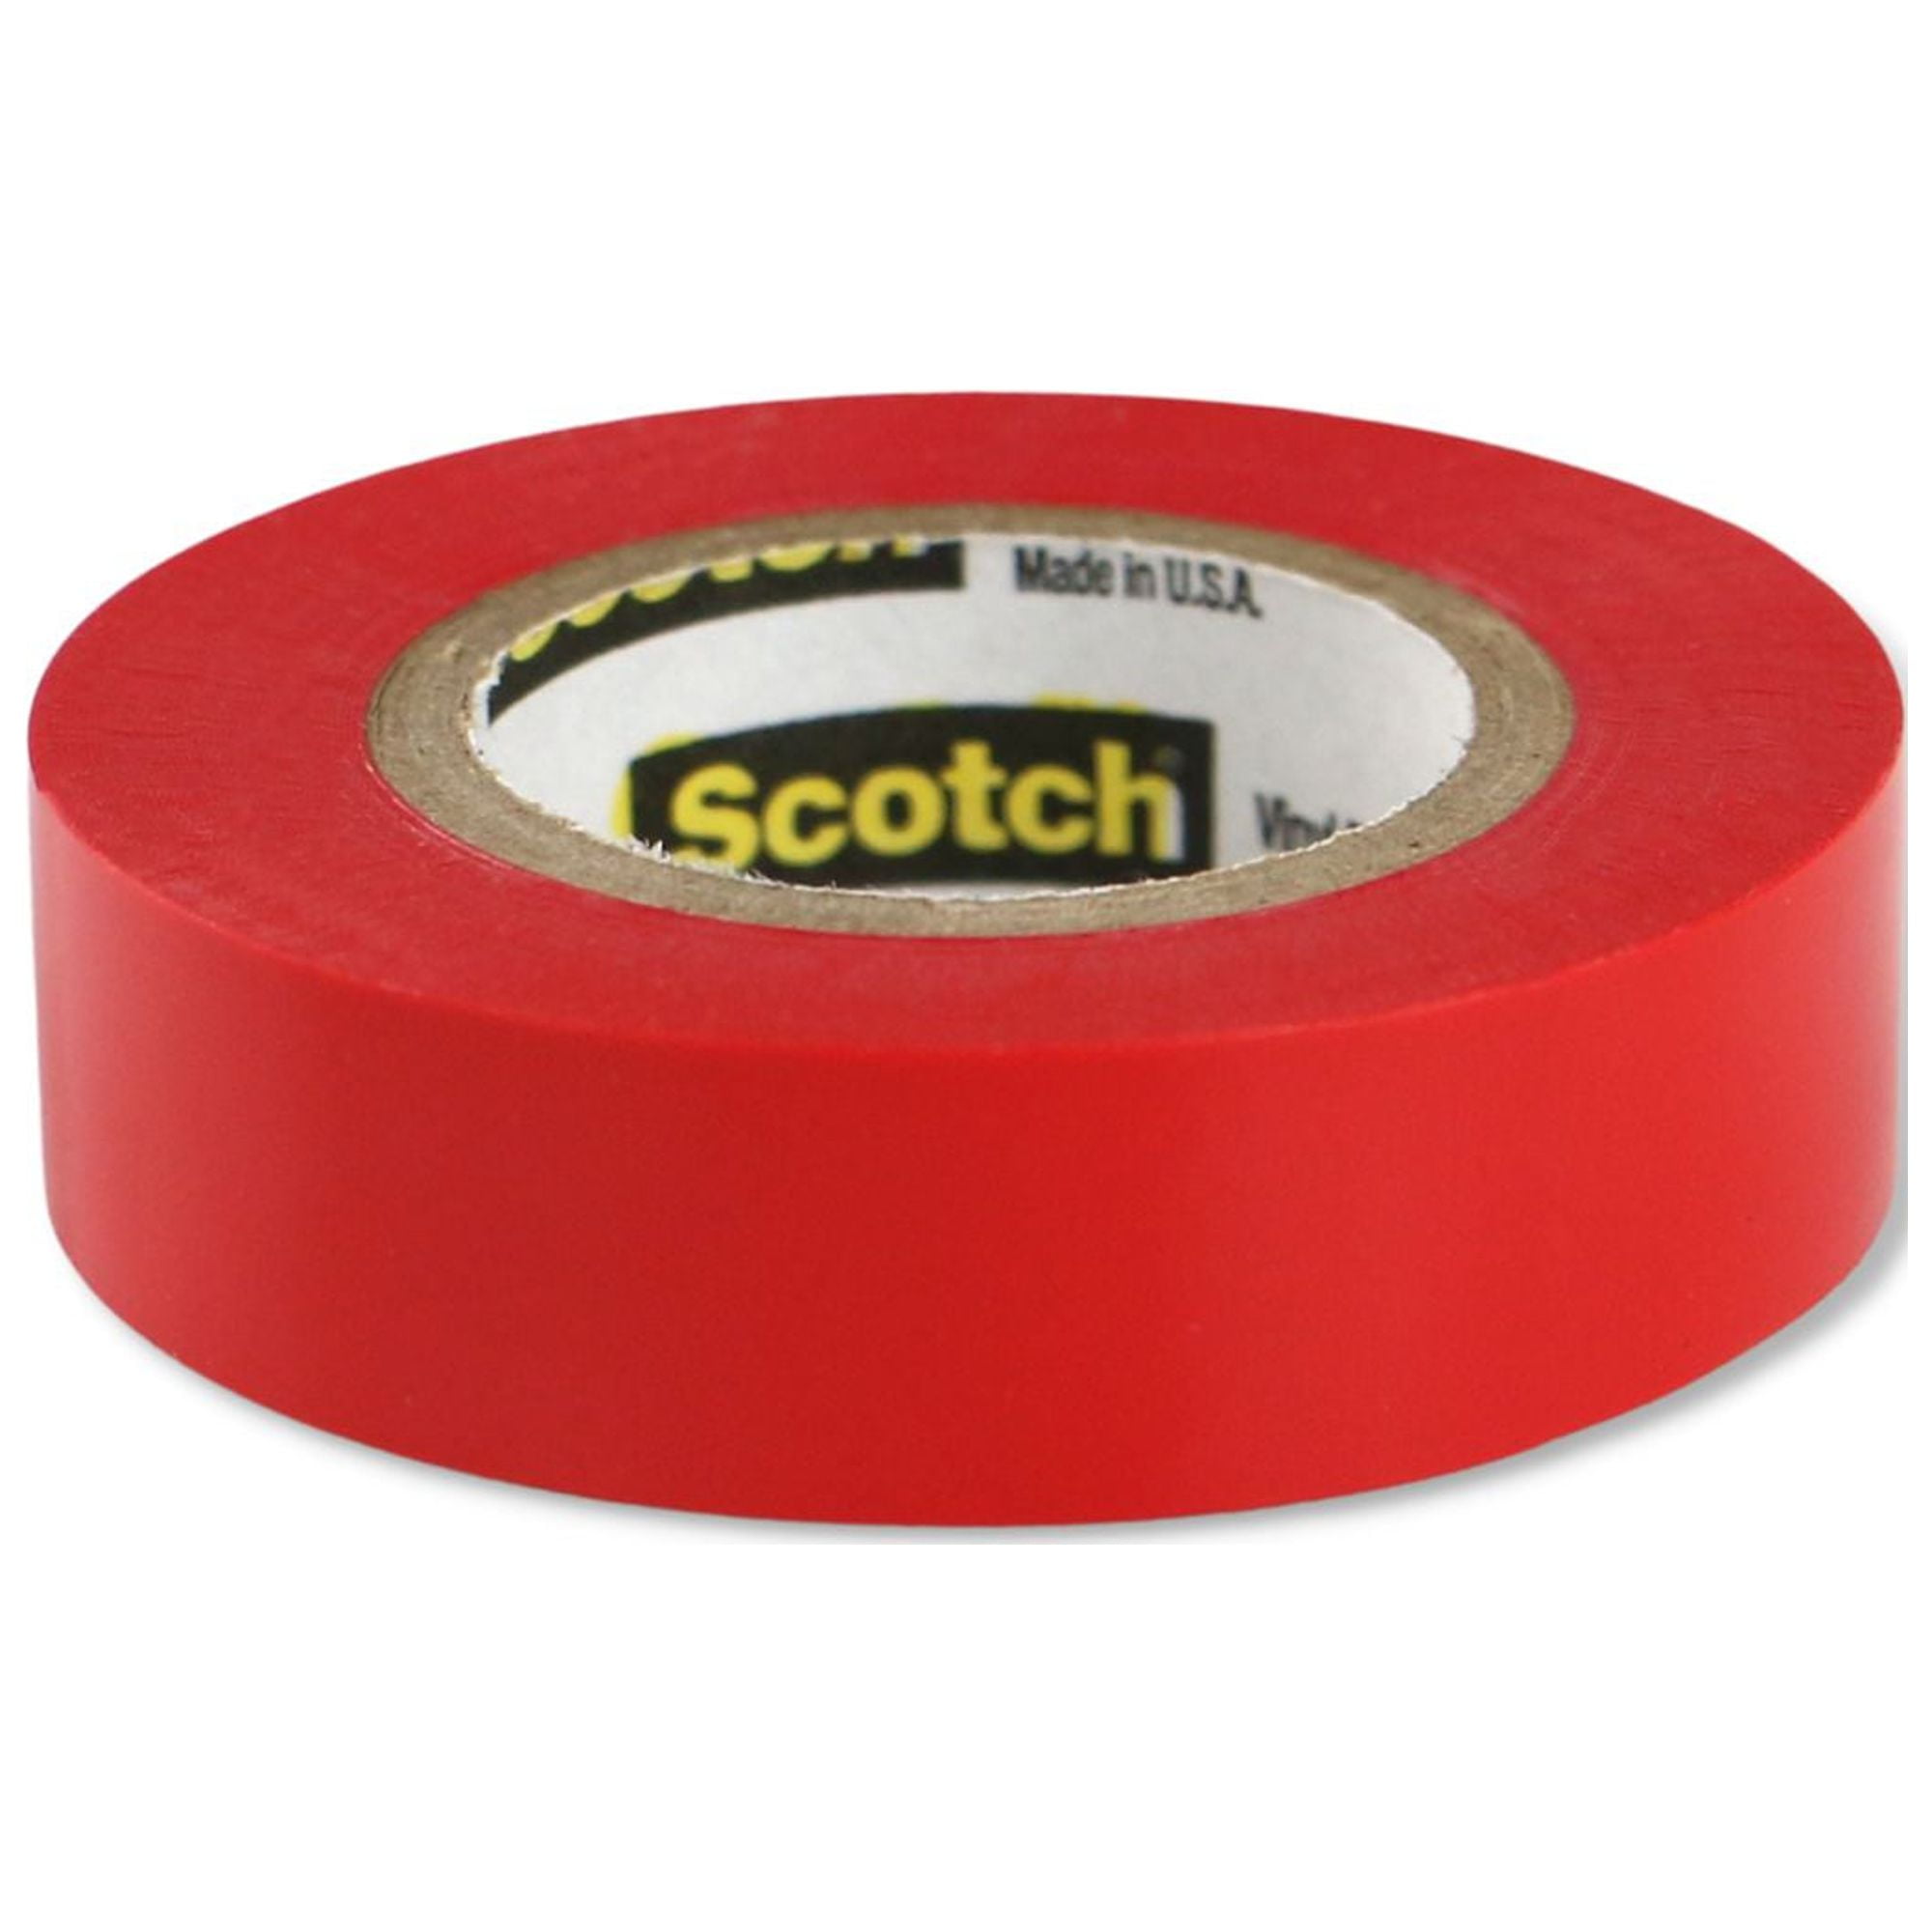 3M Scotch 690 IW Color Coding Bag/Packaging Tape 74885, 48 mm x 66 m, Red